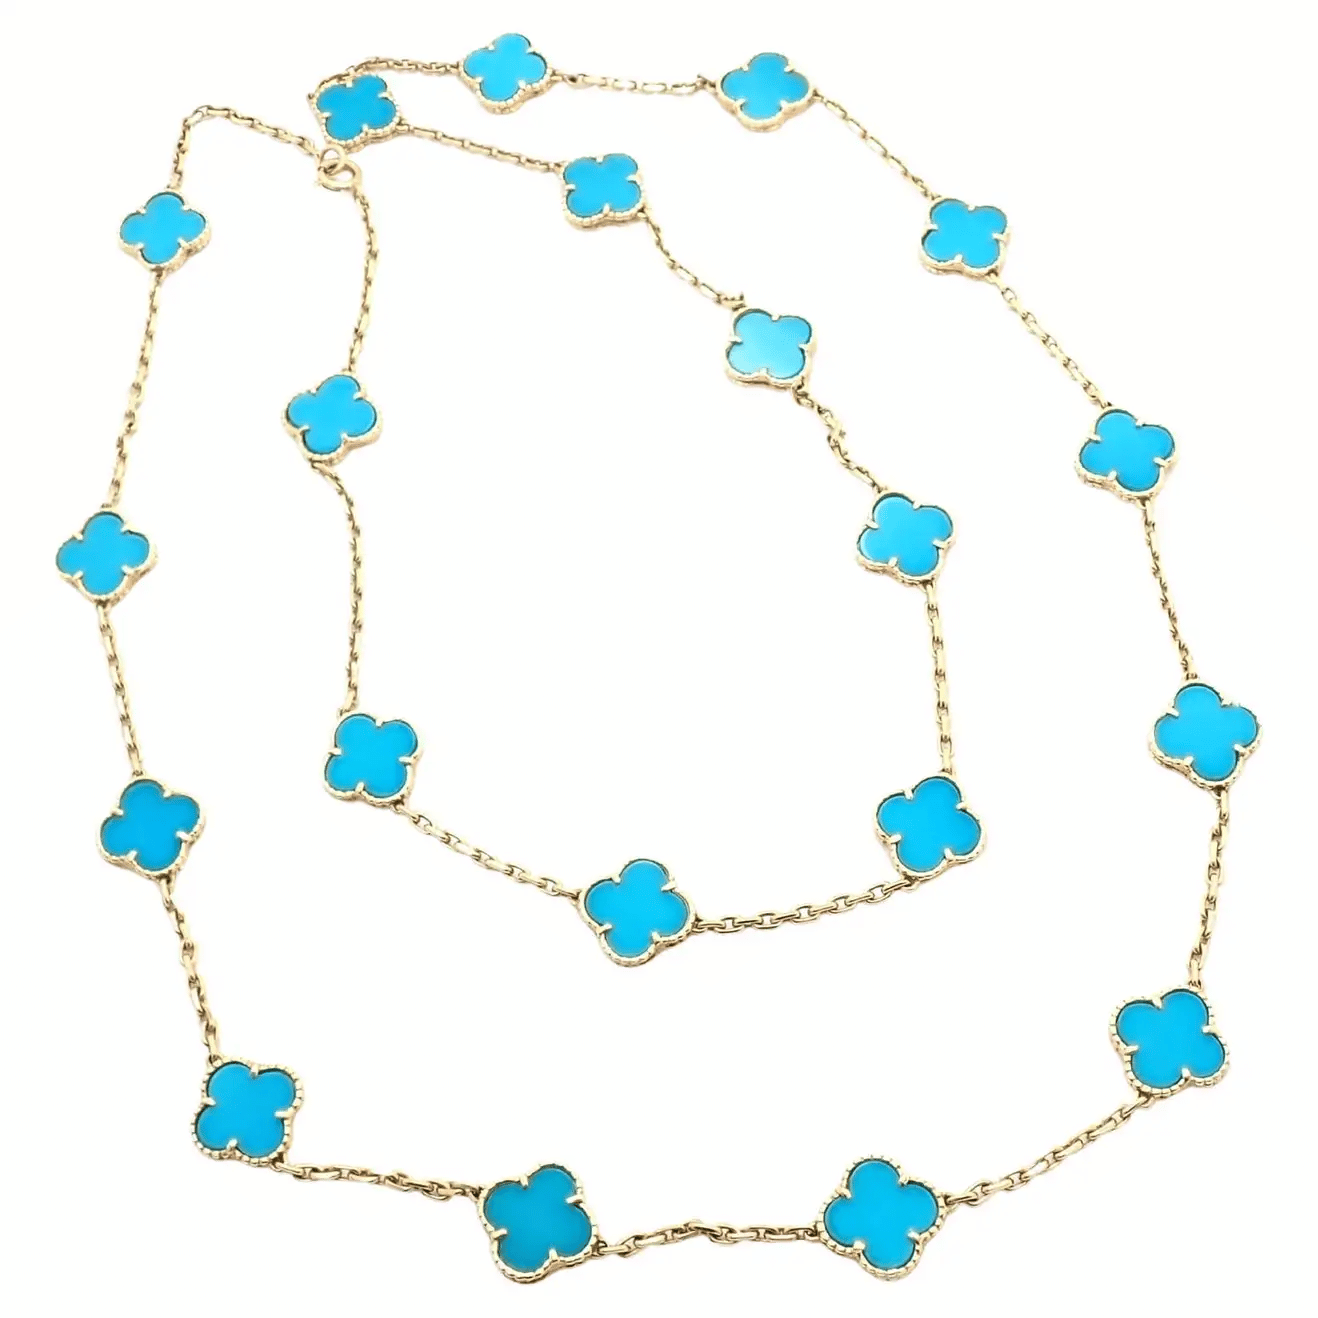 This Turquoise Van Cleef & Arpels Alhambra Necklace Is a Rare and Alluring Find